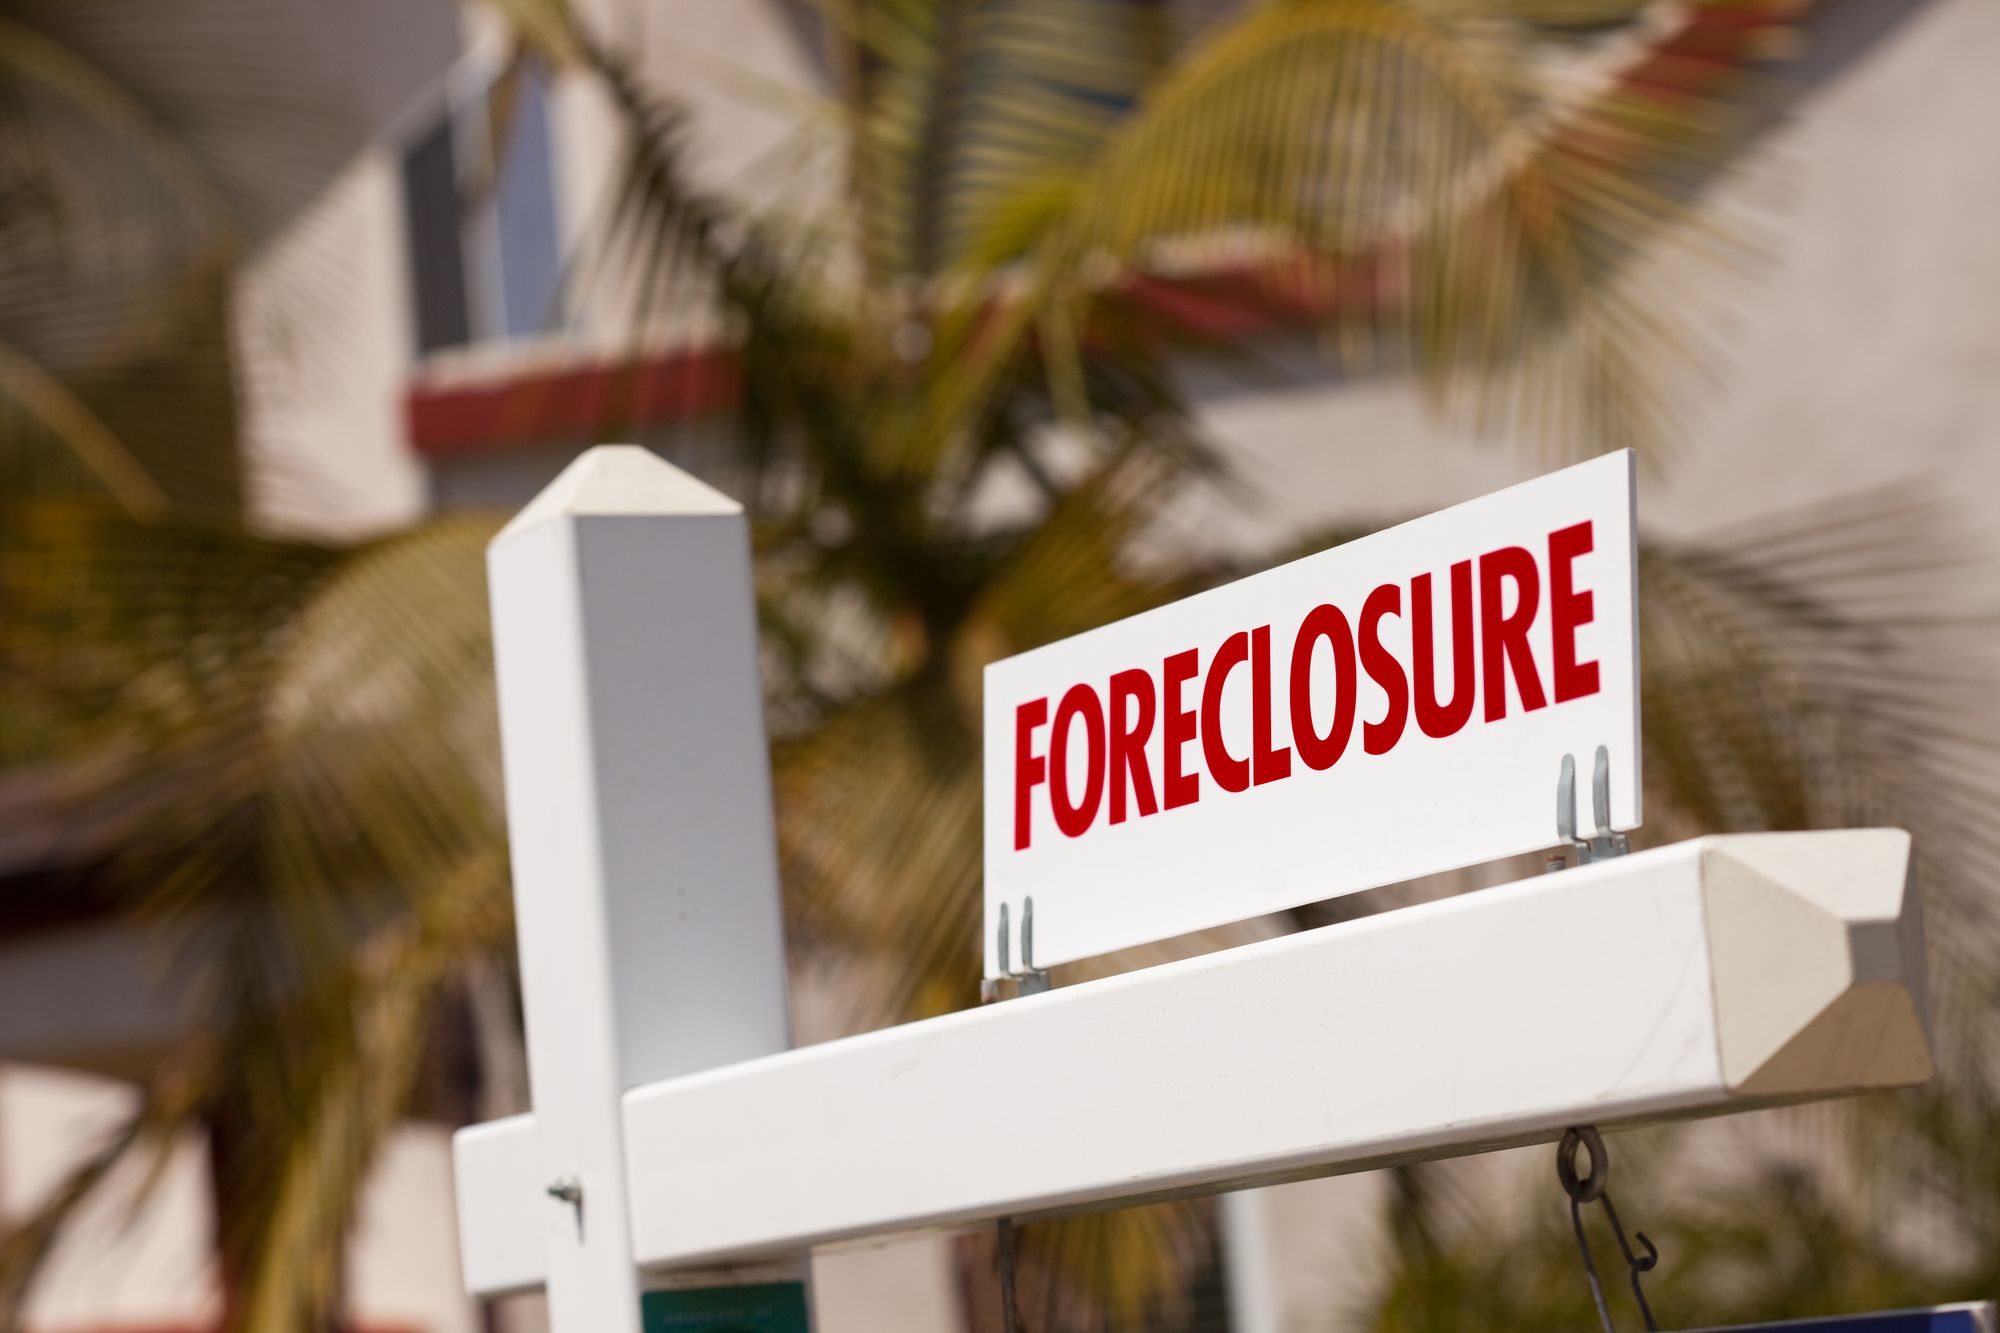 CFPB proposes rule to prohibit foreclosures and extend homeowner protection during the COVID-19 pandemic